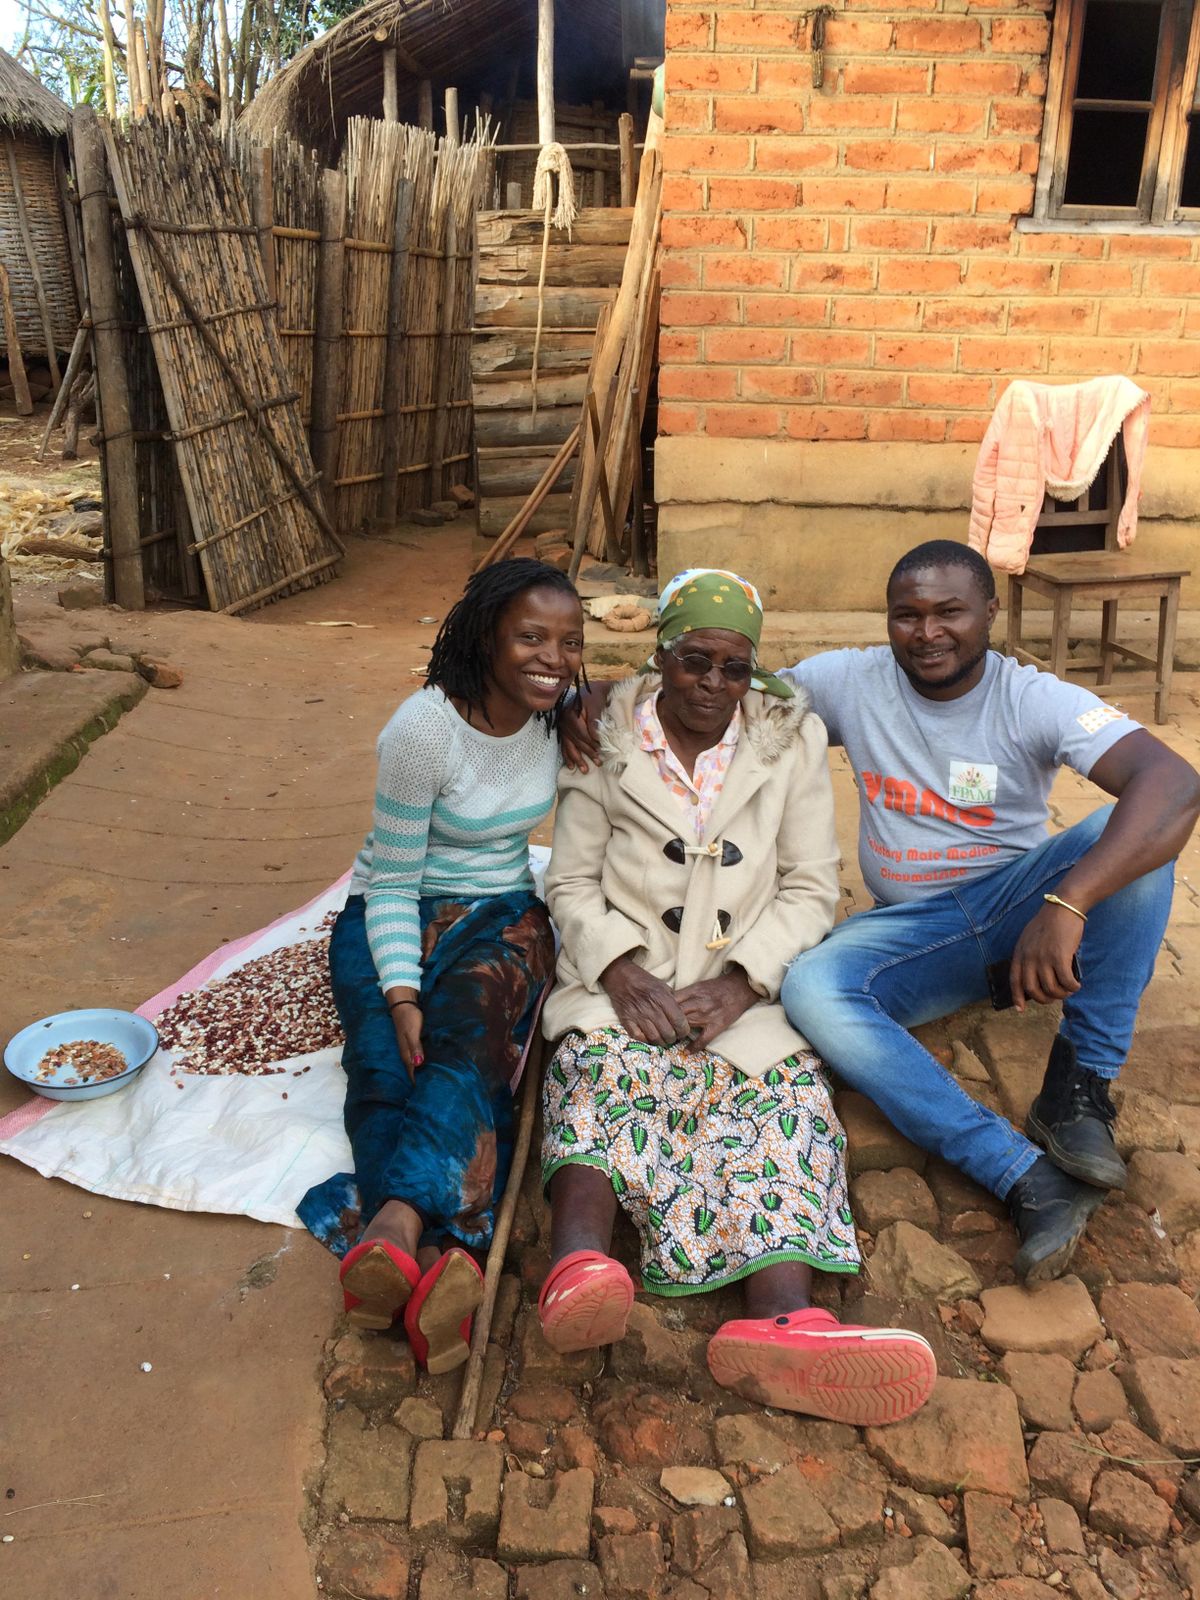 Christina Kamkosi, left, visits her maternal 80-year-old maternal grandmother and brother in Malawi in May 2019. Kamkosi will talk about her culture on Saturday, Feb. 8, 2020, at To Be Continued library branch at NorthTown Mall, as part of the Spokane Public Library Black History Month events. (Christina Kamkosi / Courtesy)